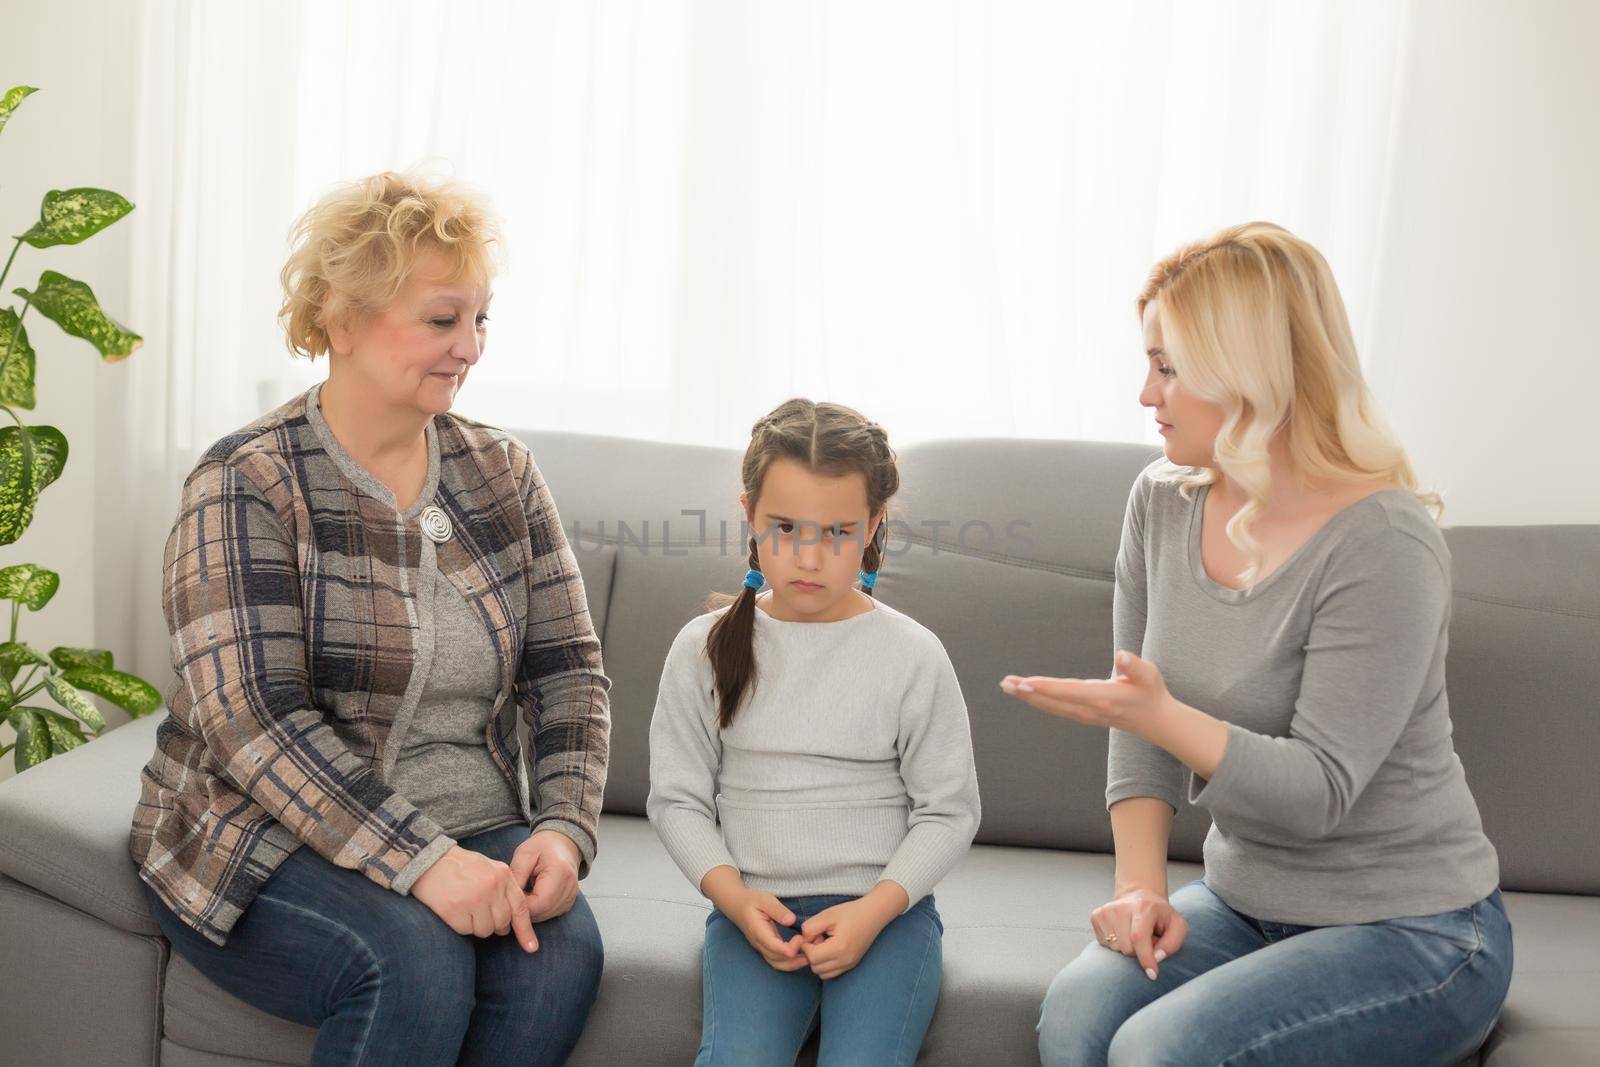 Little girl sitting at home crying while mom and granny scolding her by Andelov13